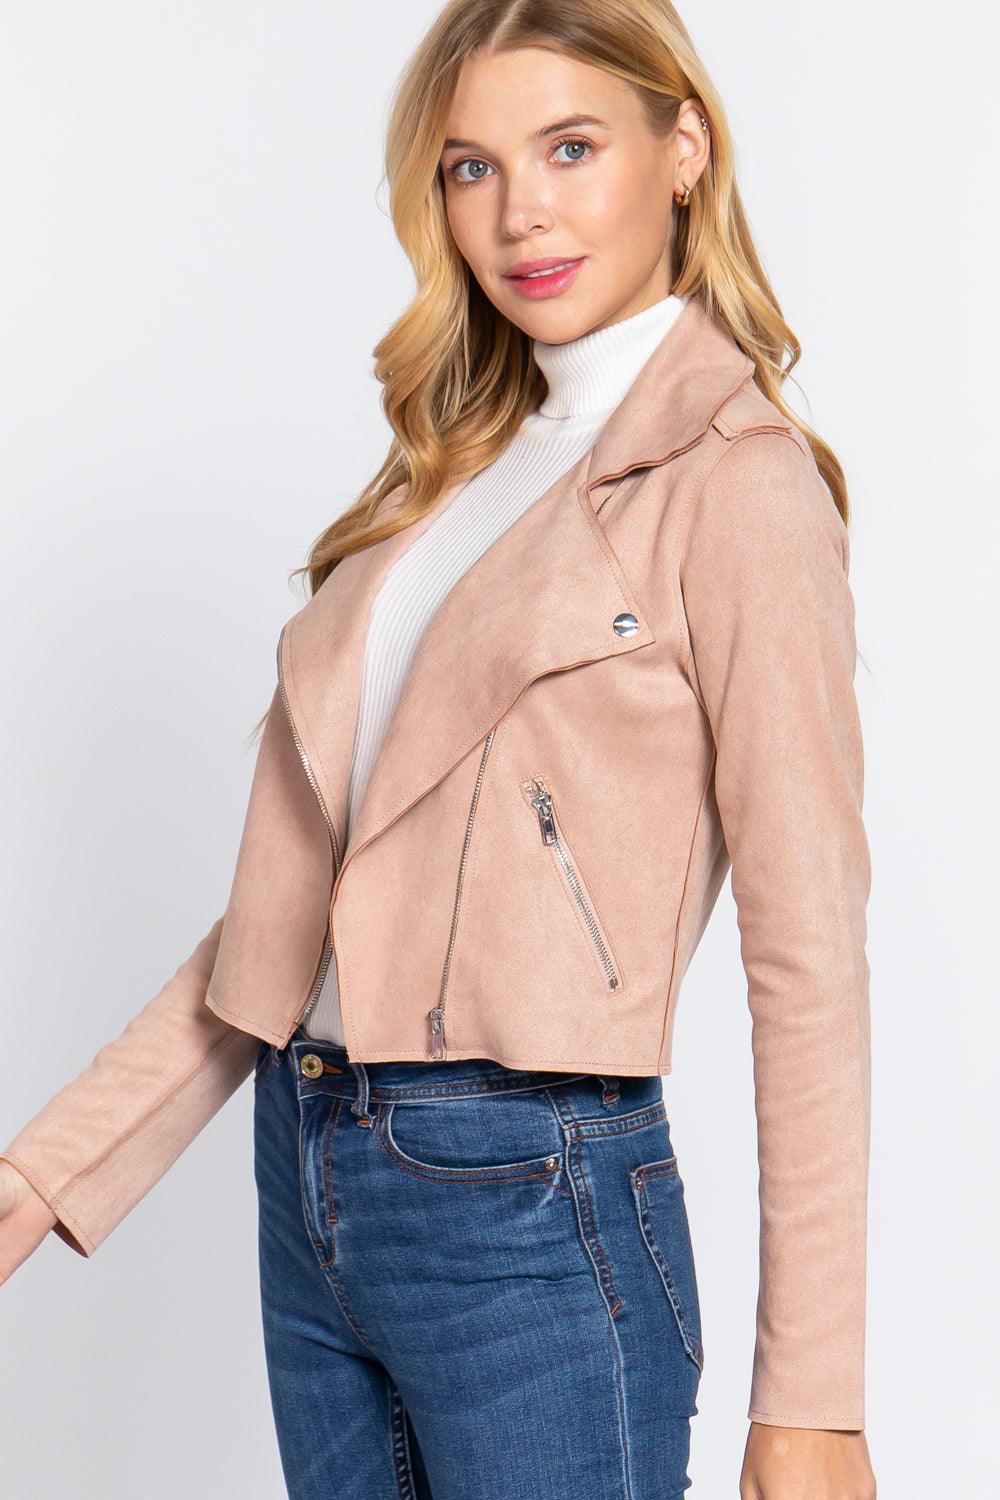 Buying Guide: Stylish and Healthy Dresses 2023 | Fashionably Fit | Long Slv Biker Faux Suede Short Jacket